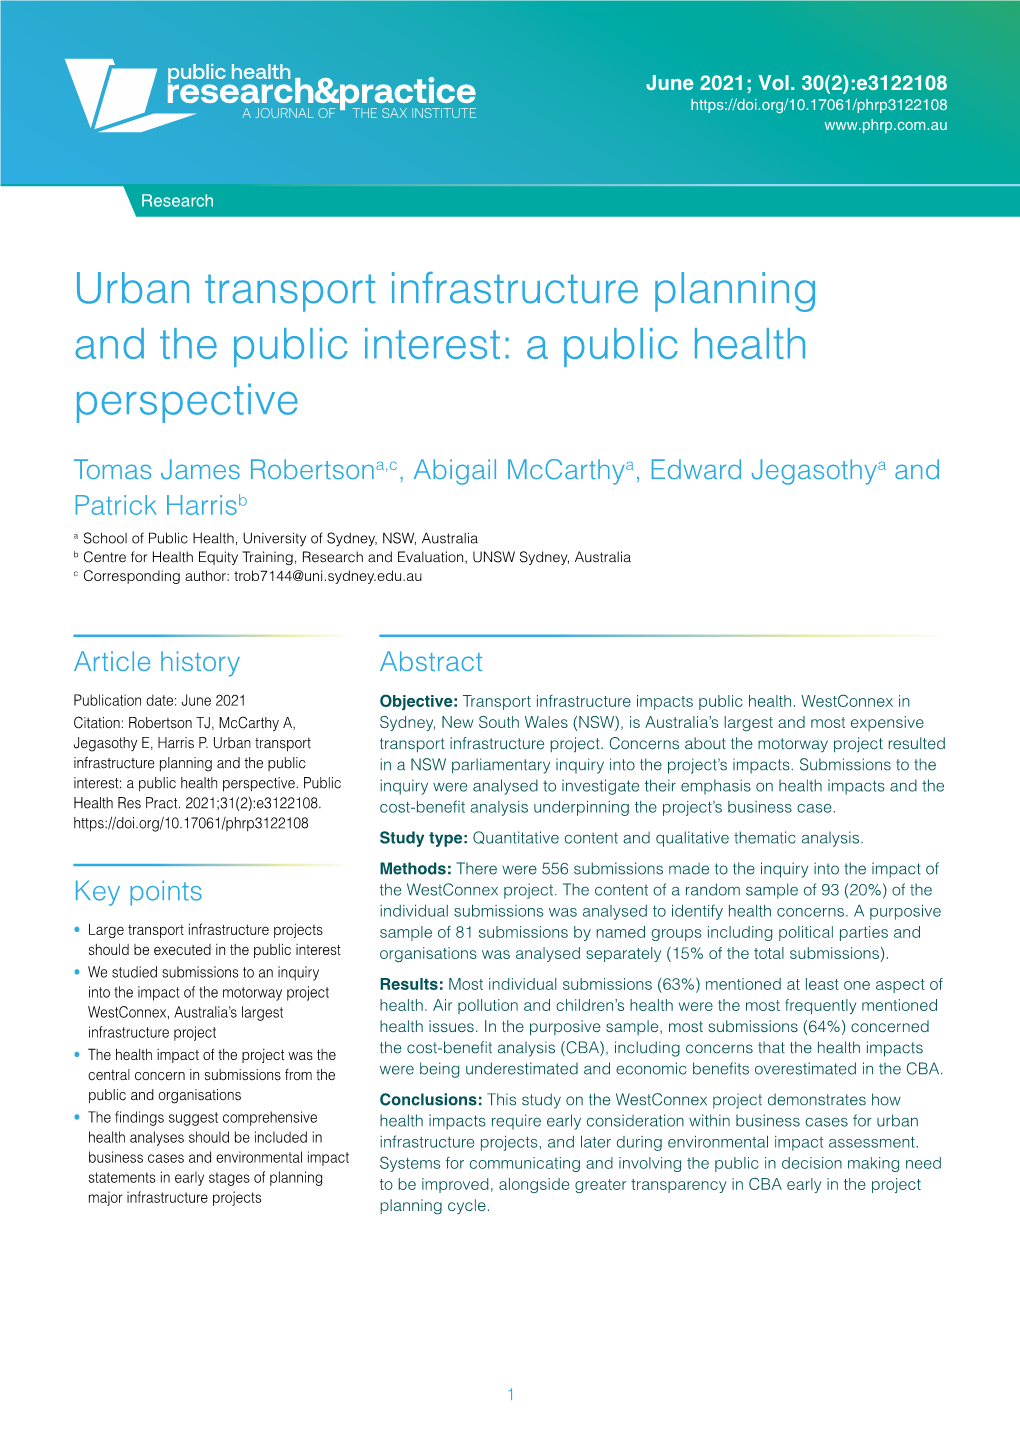 Urban Transport Infrastructure Planning and the Public Interest: a Public Health Perspective